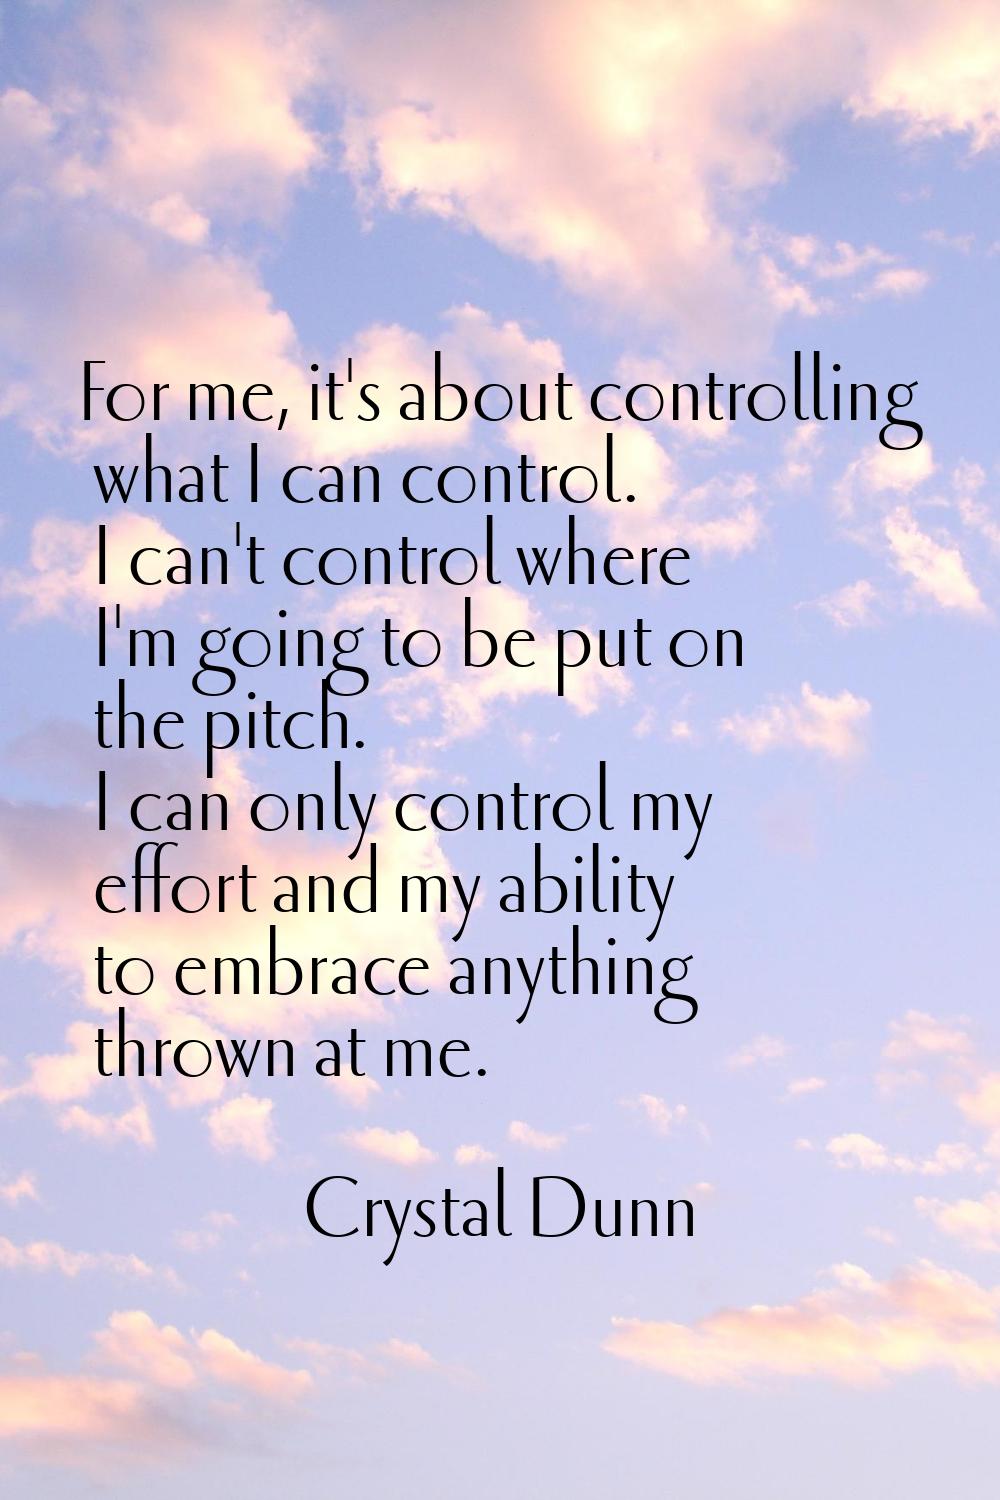 For me, it's about controlling what I can control. I can't control where I'm going to be put on the